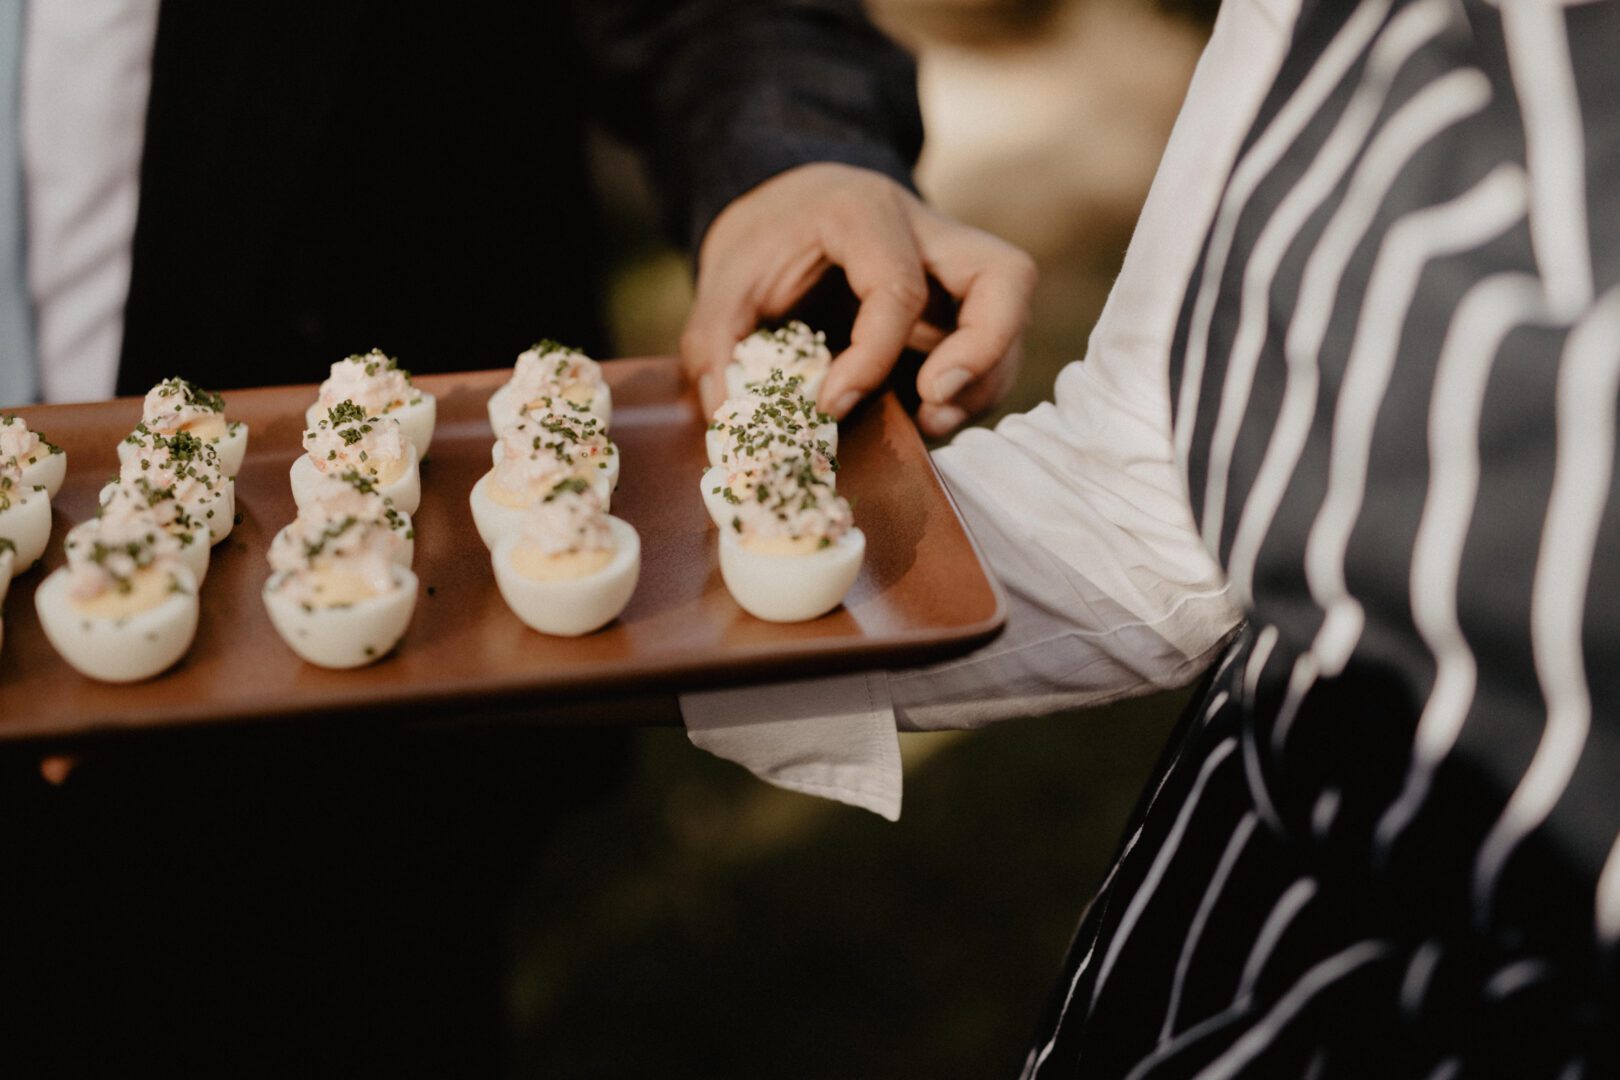 Deviled eggs served on a tray.